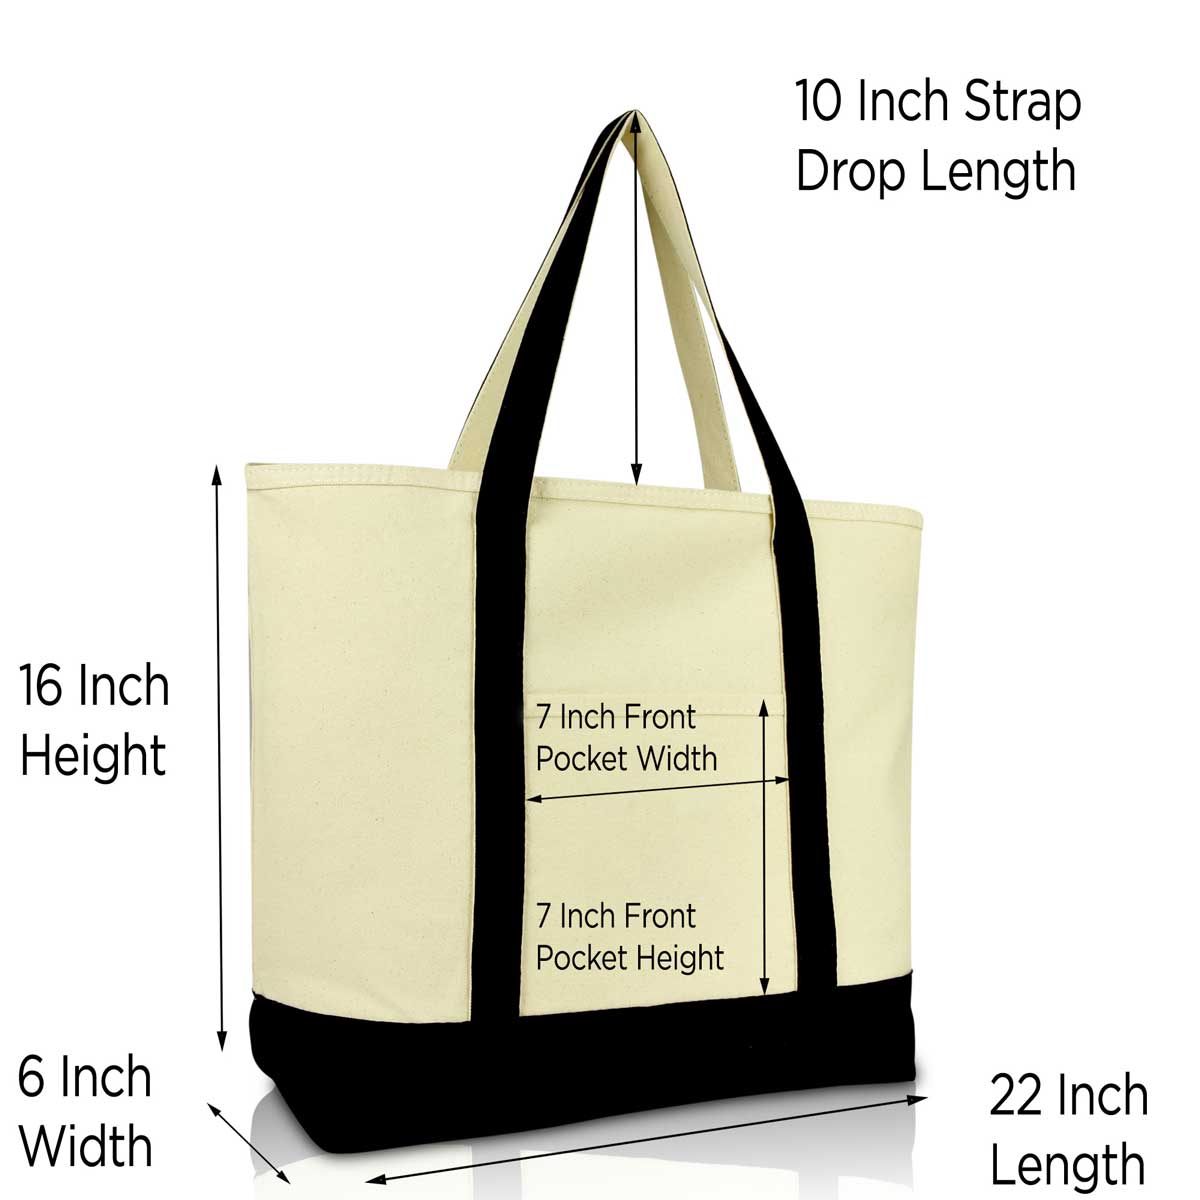 Dalix 22 Large Cotton Canvas Zippered Shopping Tote Grocery Bag in Black